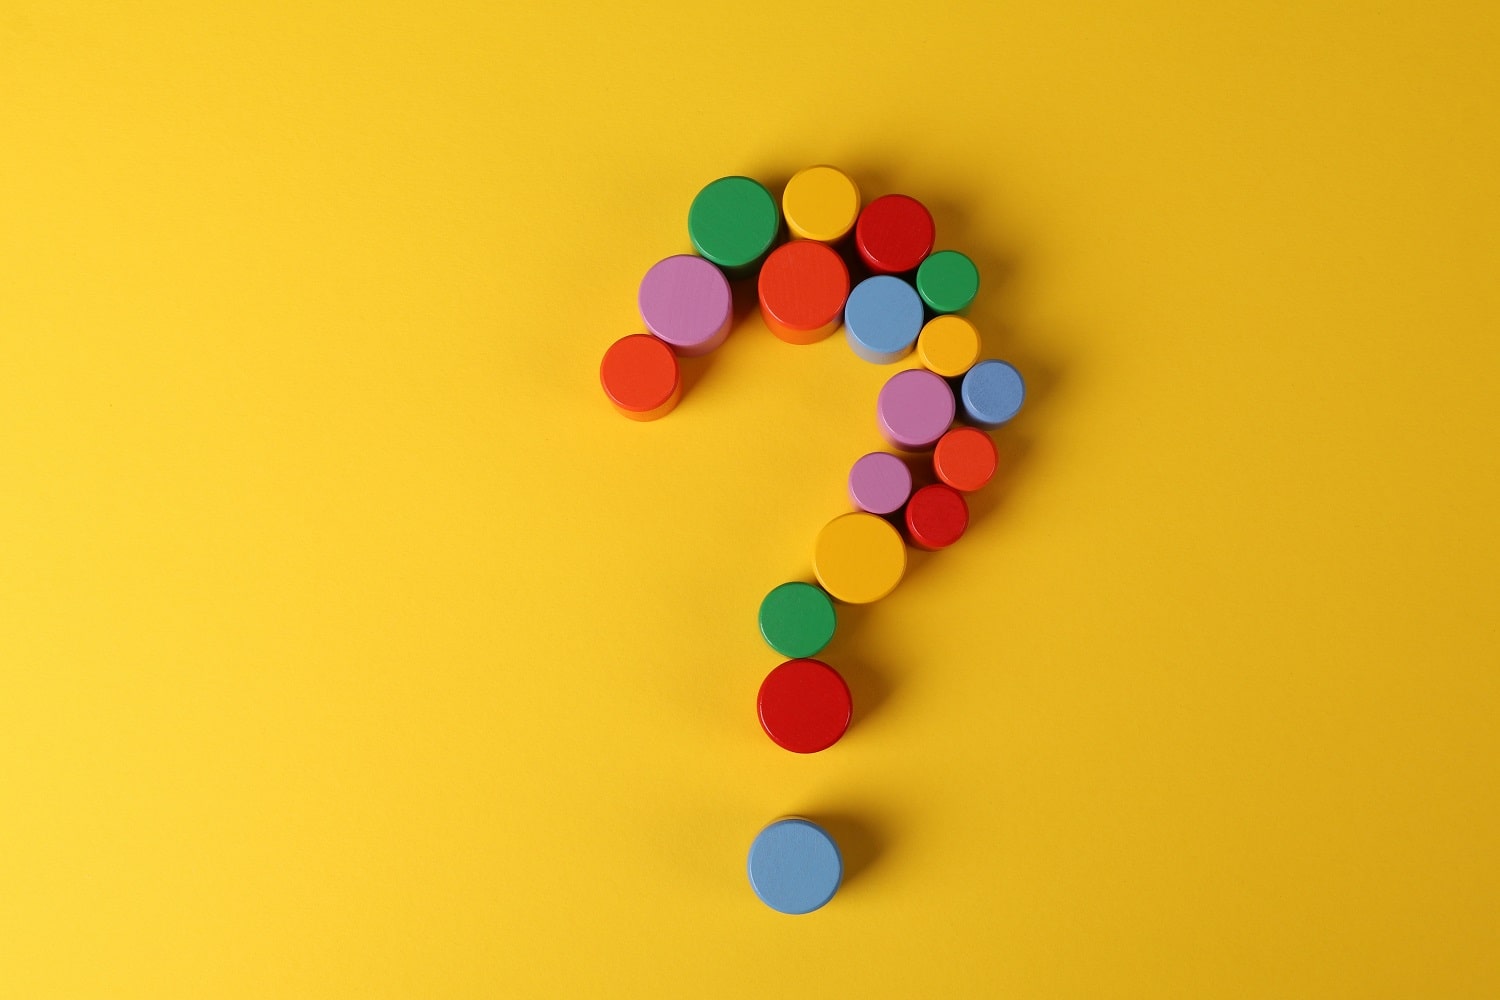 A question mark on a yellow background, representing the frequently asked questions by Amazon sellers about Amazon seller insurance.